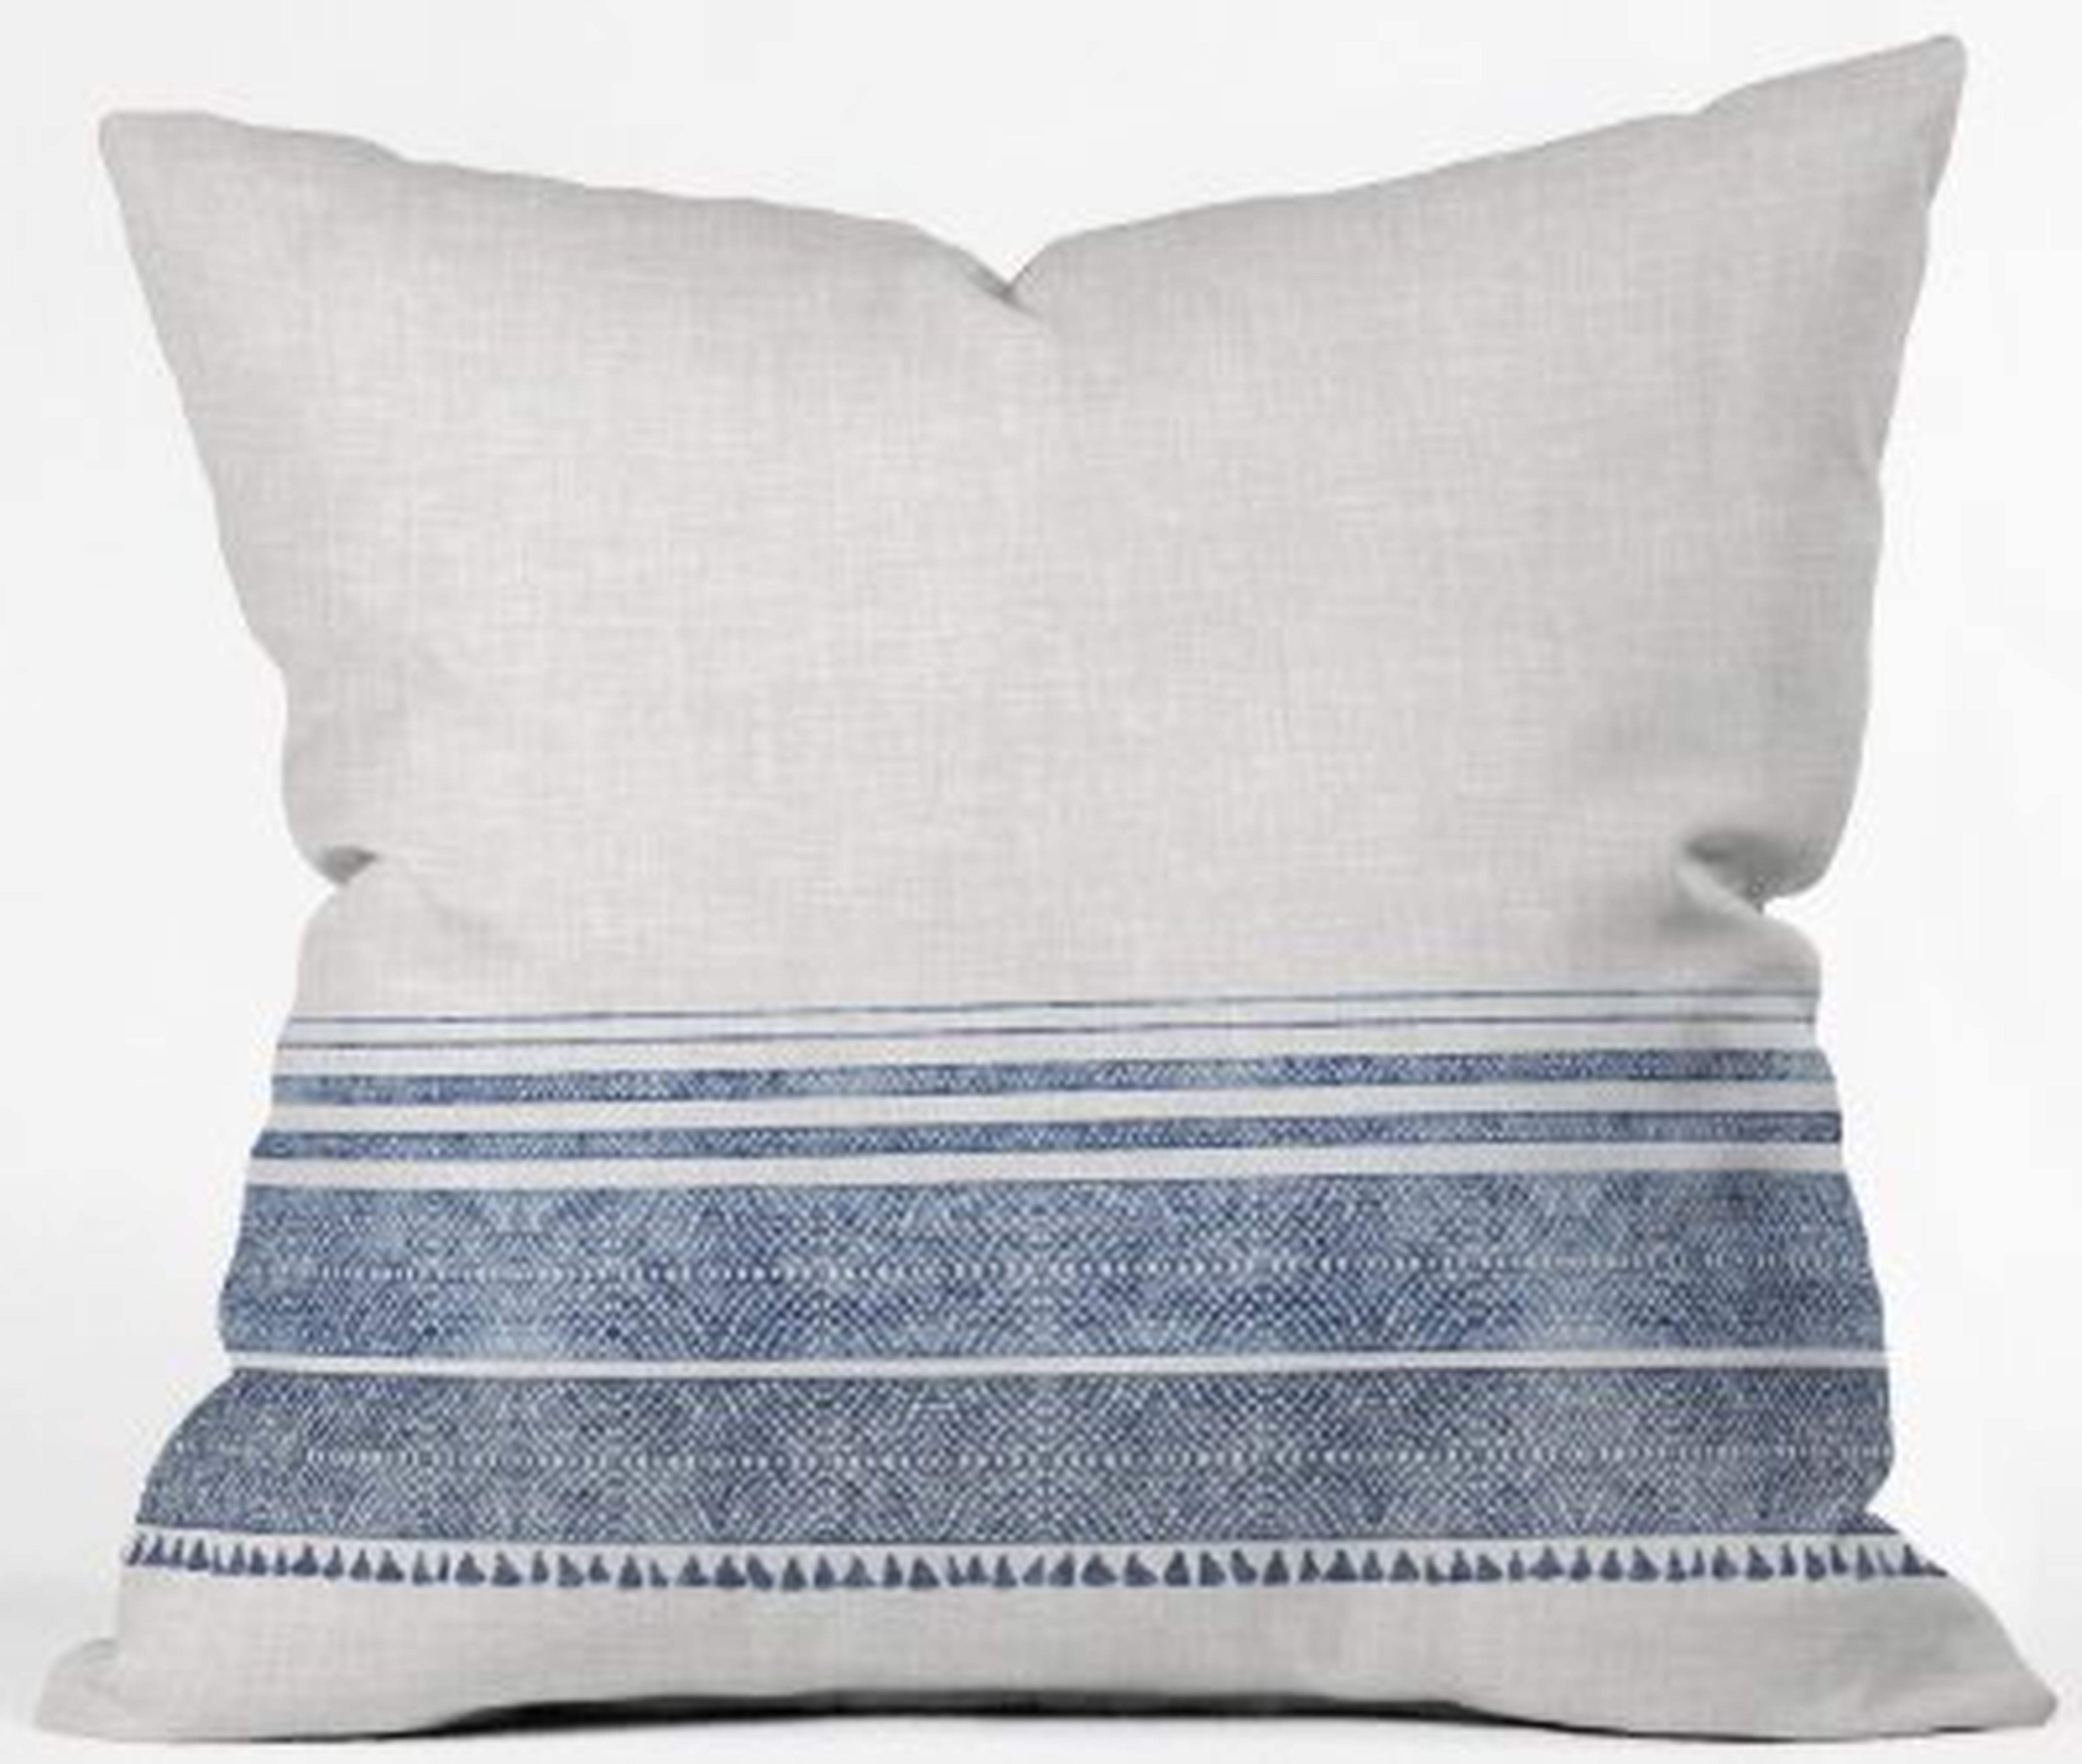 FRENCH LINEN CHAMBRAY TASSEL Throw Pillow Cover // 18x18 - Wander Print Co.